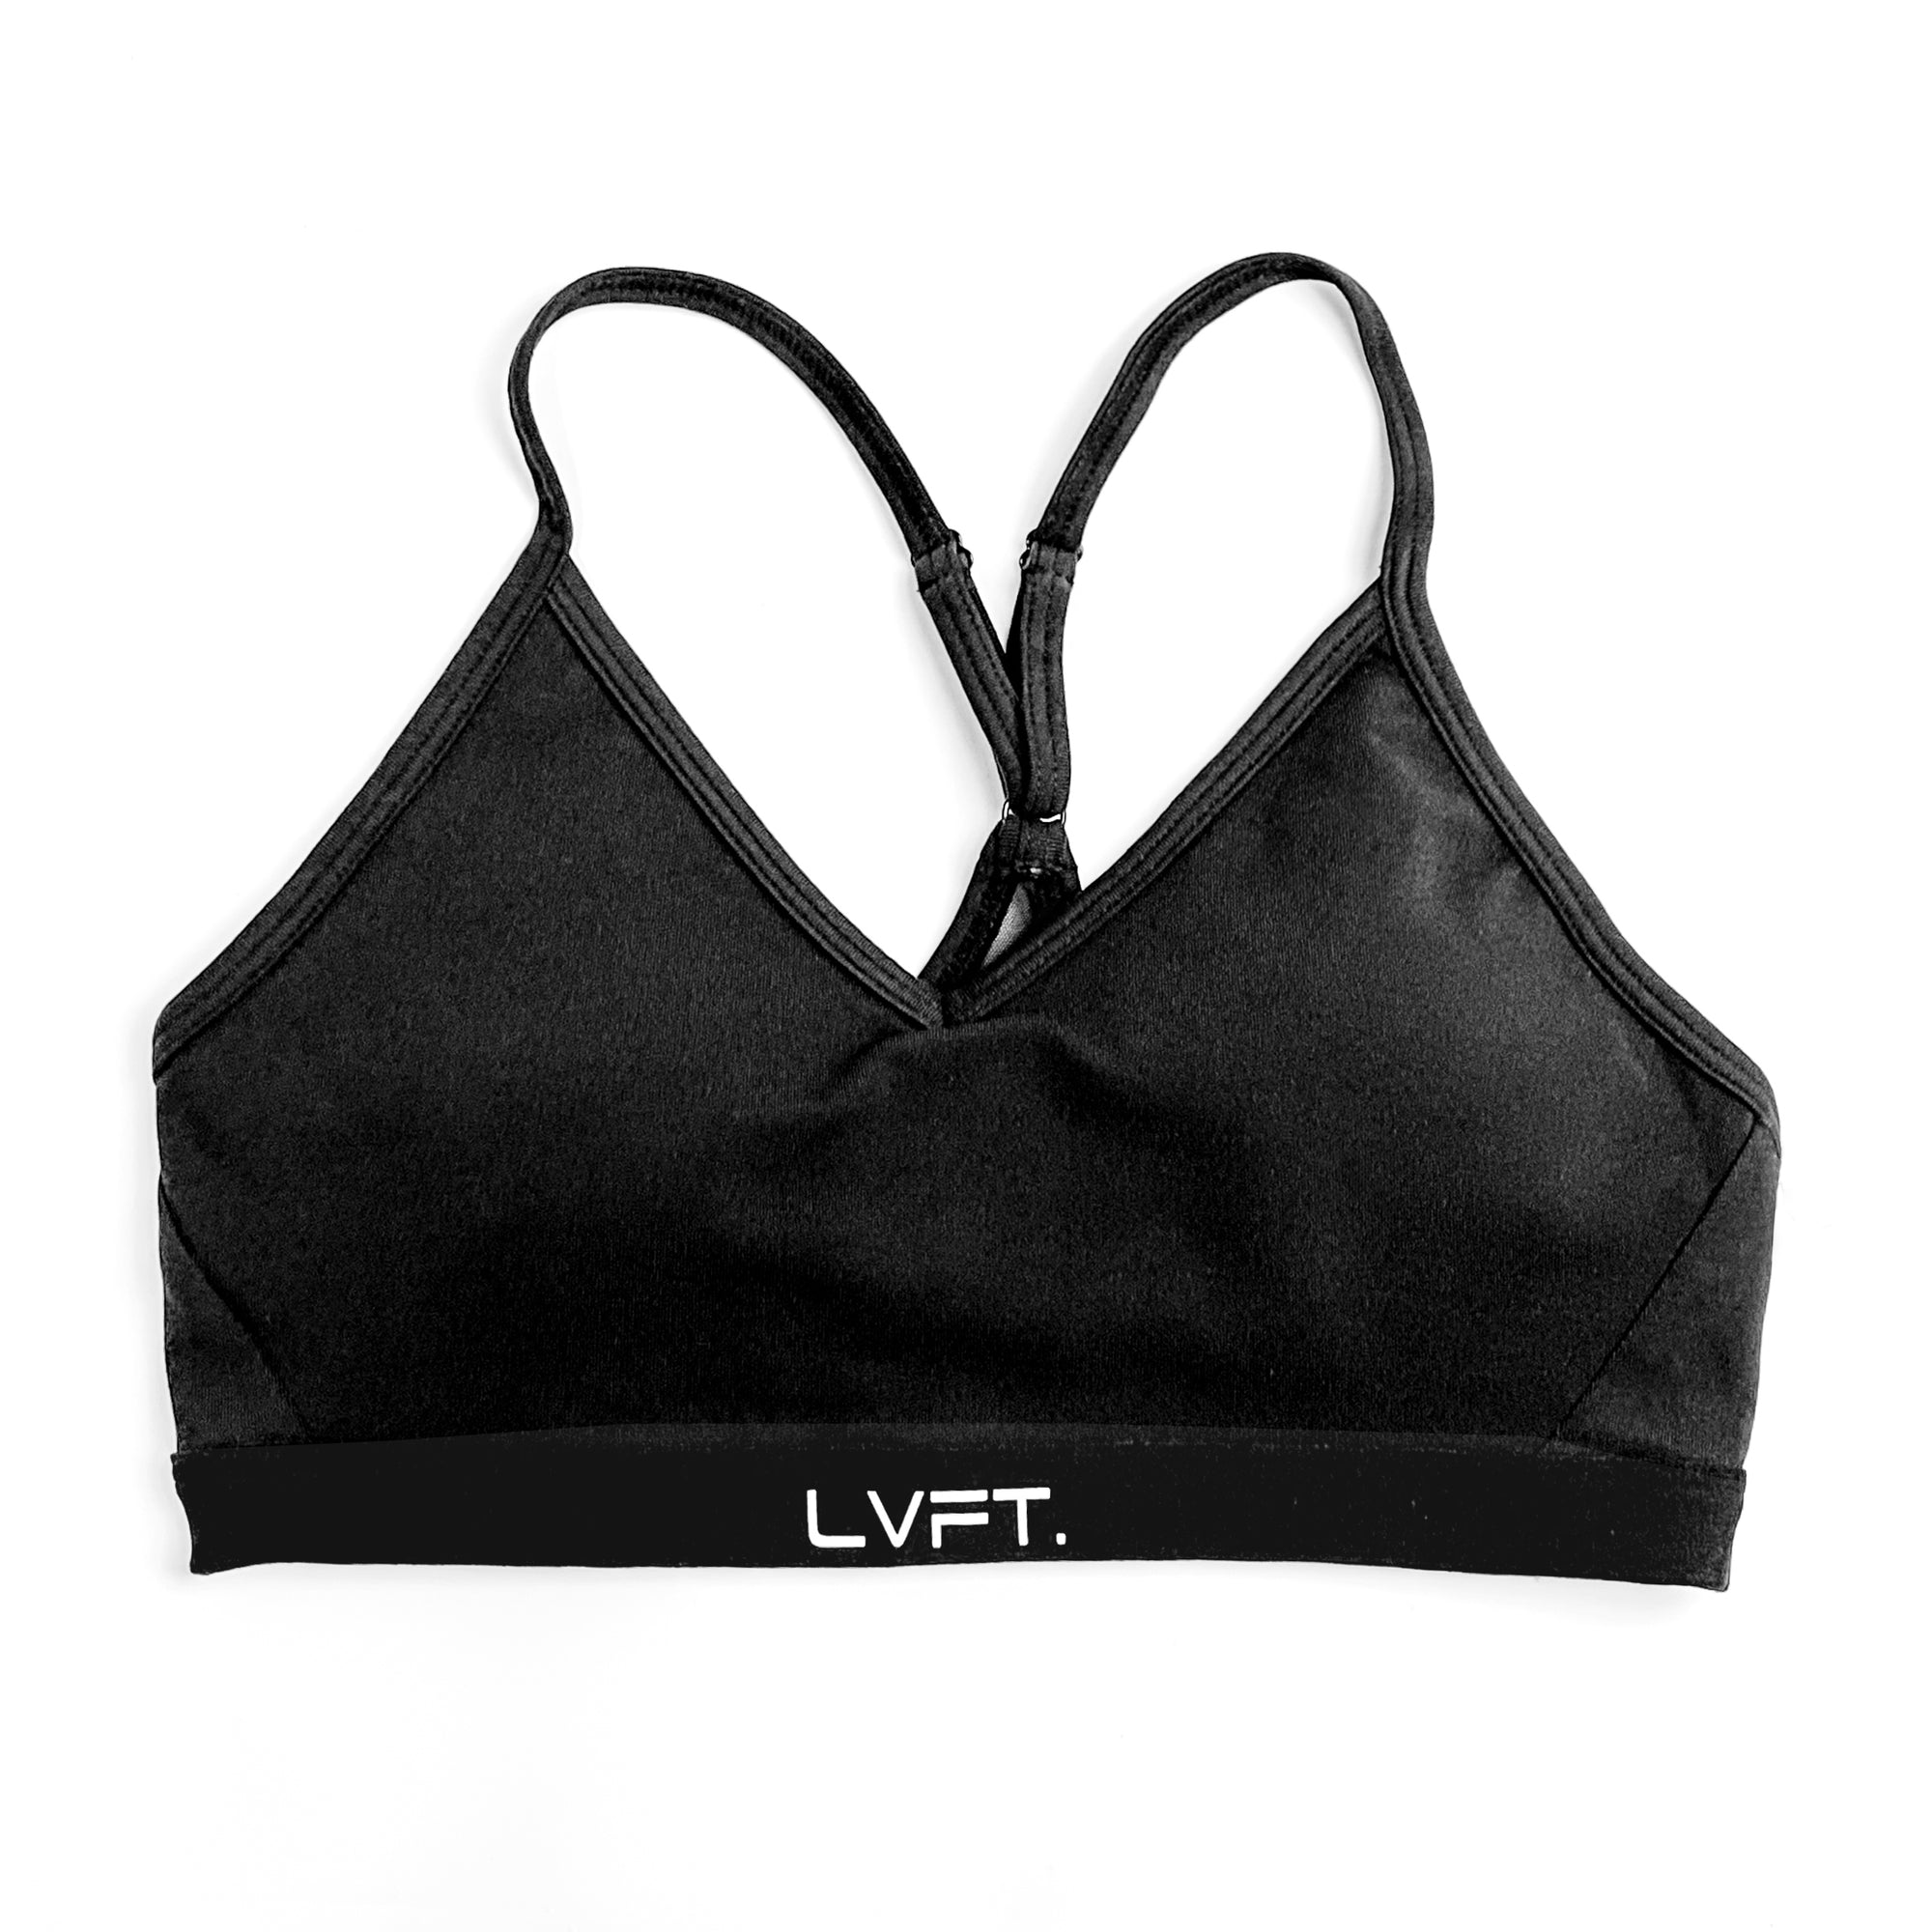 Free People Movement light synergy sports bra with cut out back co-ord